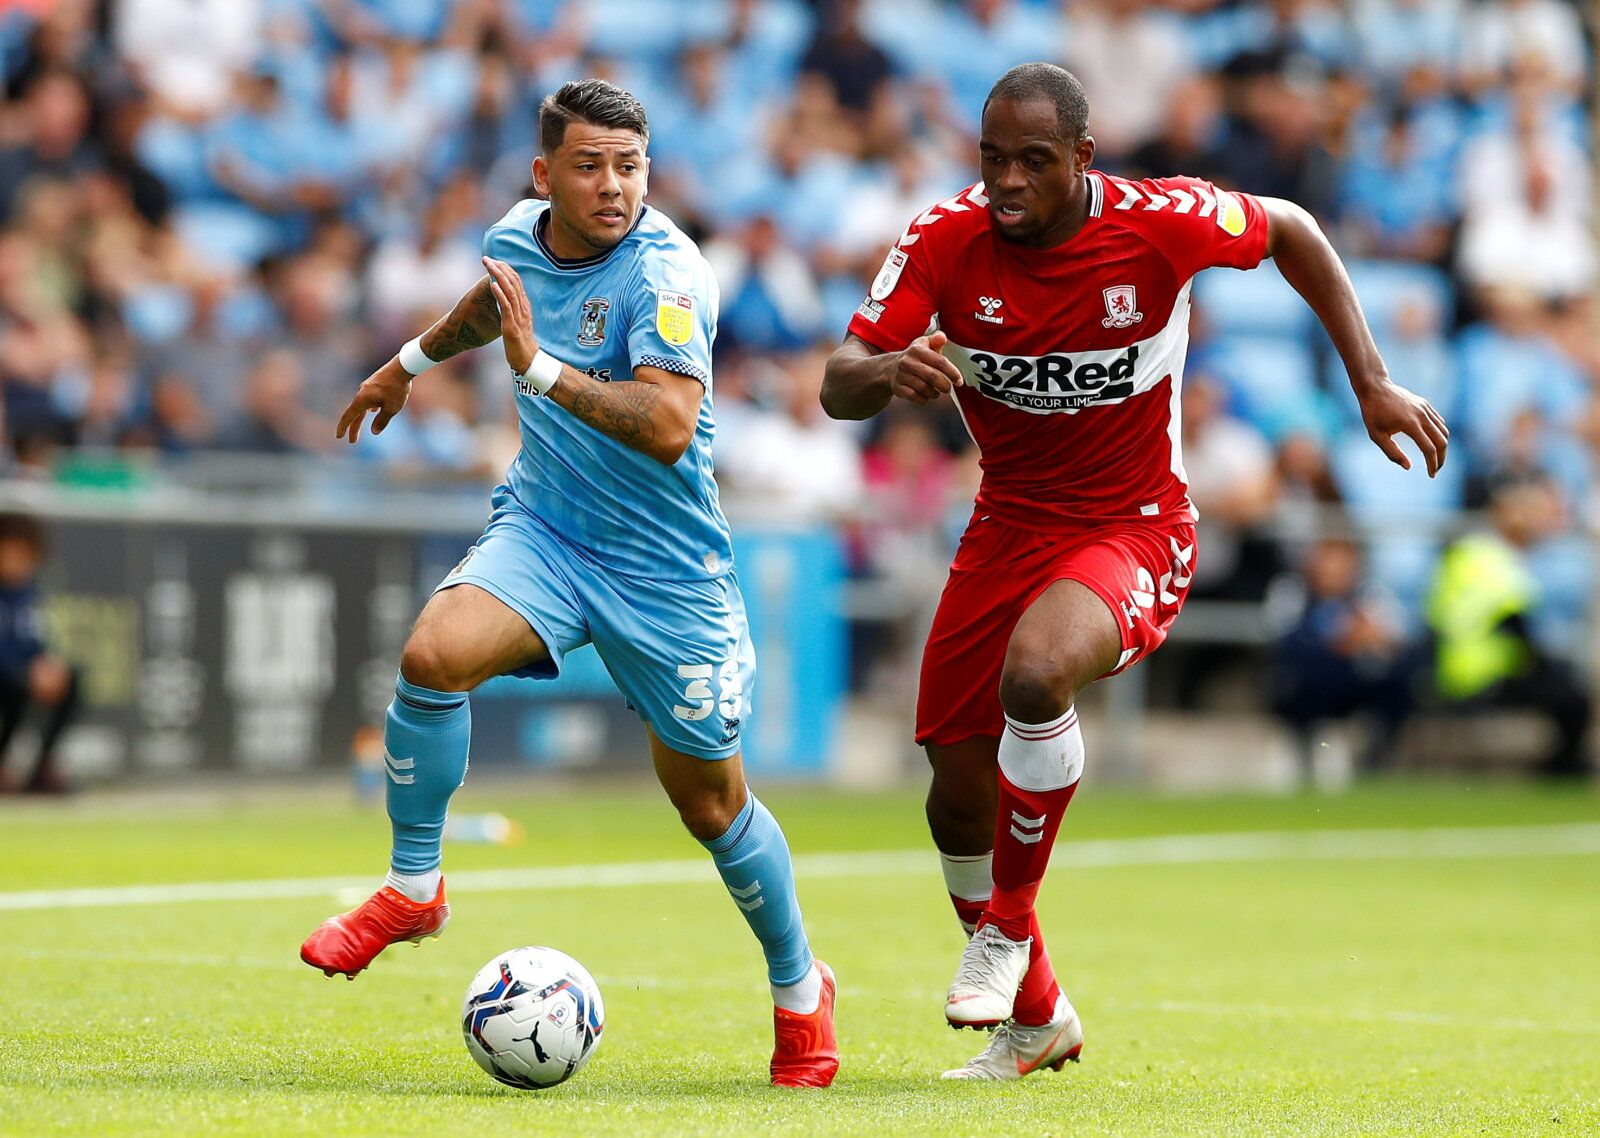 Soccer Football - Championship - Coventry City v Middlesbrough - Coventry Building Society Arena, Coventry, Britain - September 11, 2021  Coventry City's Gustavo Hamer in action with Middlesbrough's Uche Ikpeazu  Action Images/Jason Cairnduff  EDITORIAL USE ONLY. No use with unauthorized audio, video, data, fixture lists, club/league logos or 